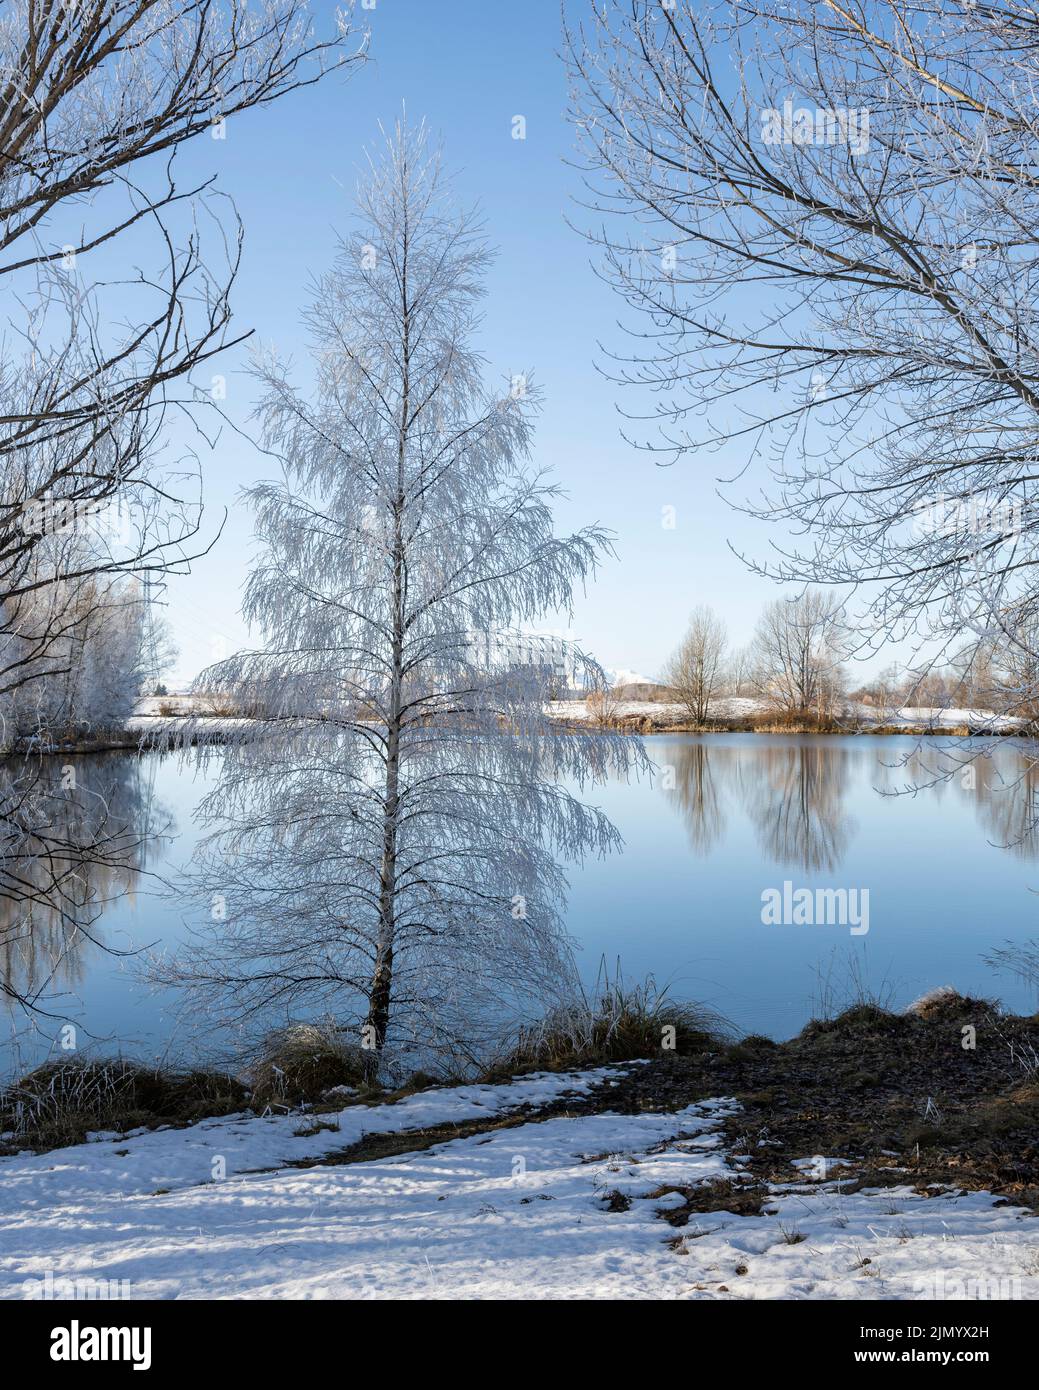 Trees covered by hoar frost at Kellands Pond, Twizel, New Zealand. Vertical format. Stock Photo